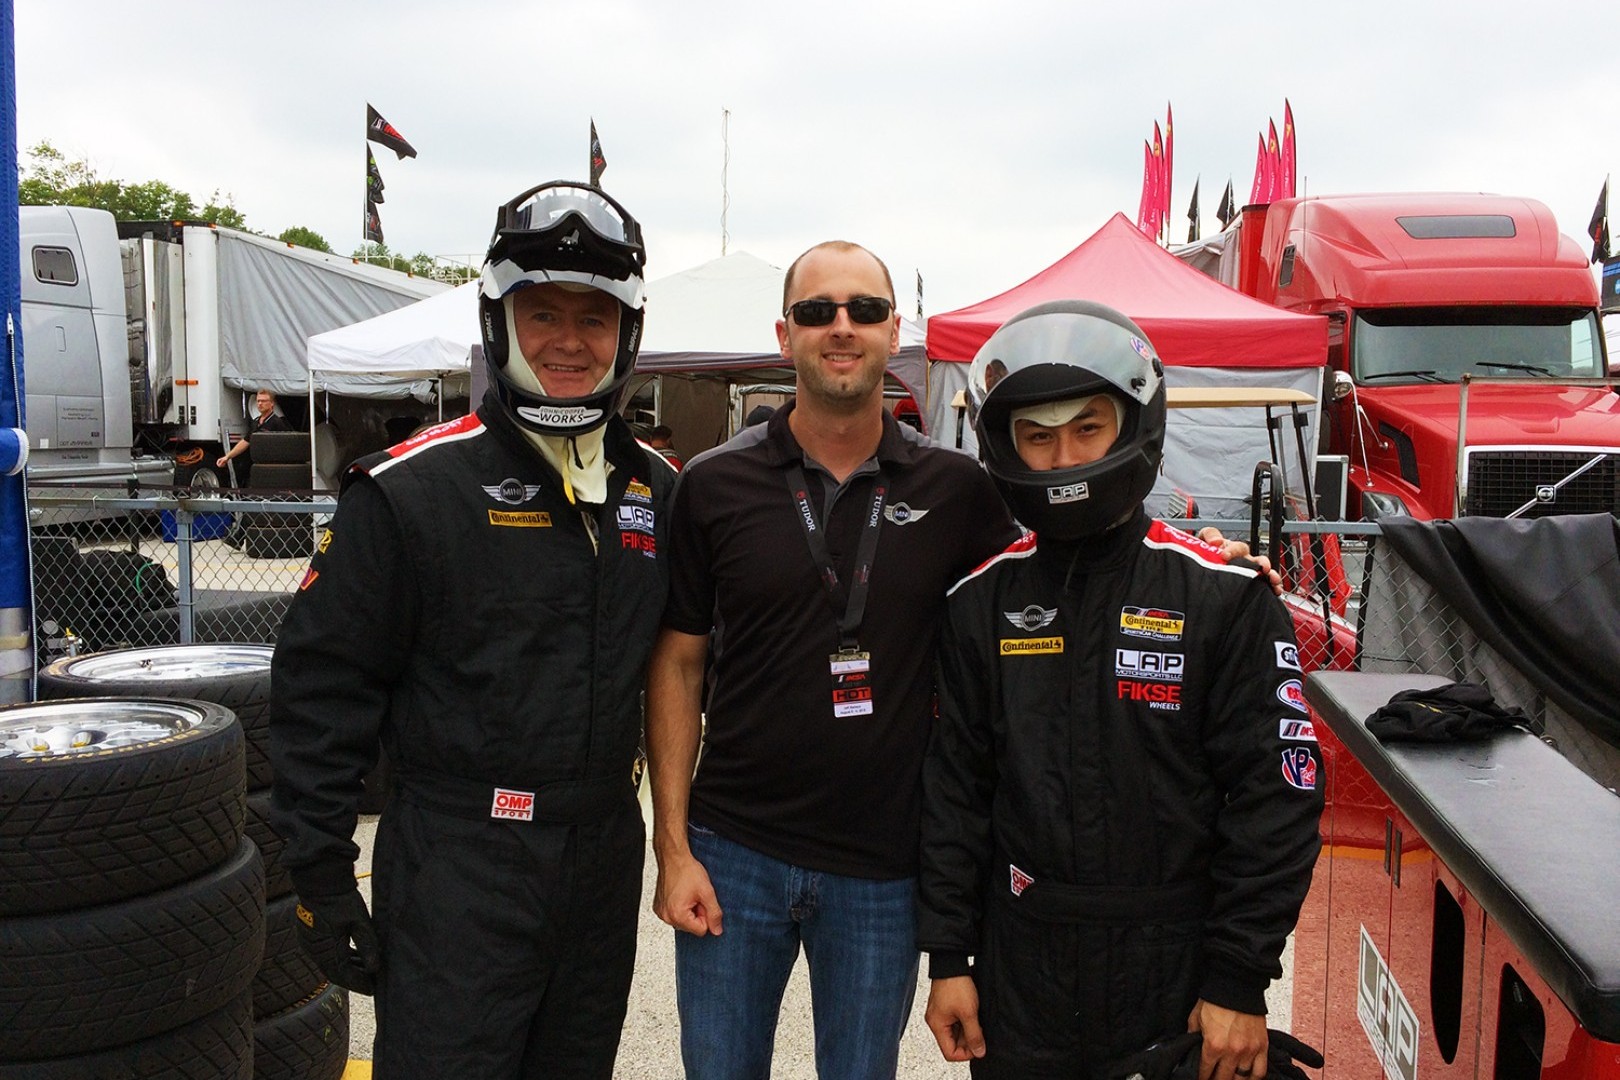 Thank you to our Road America Crew